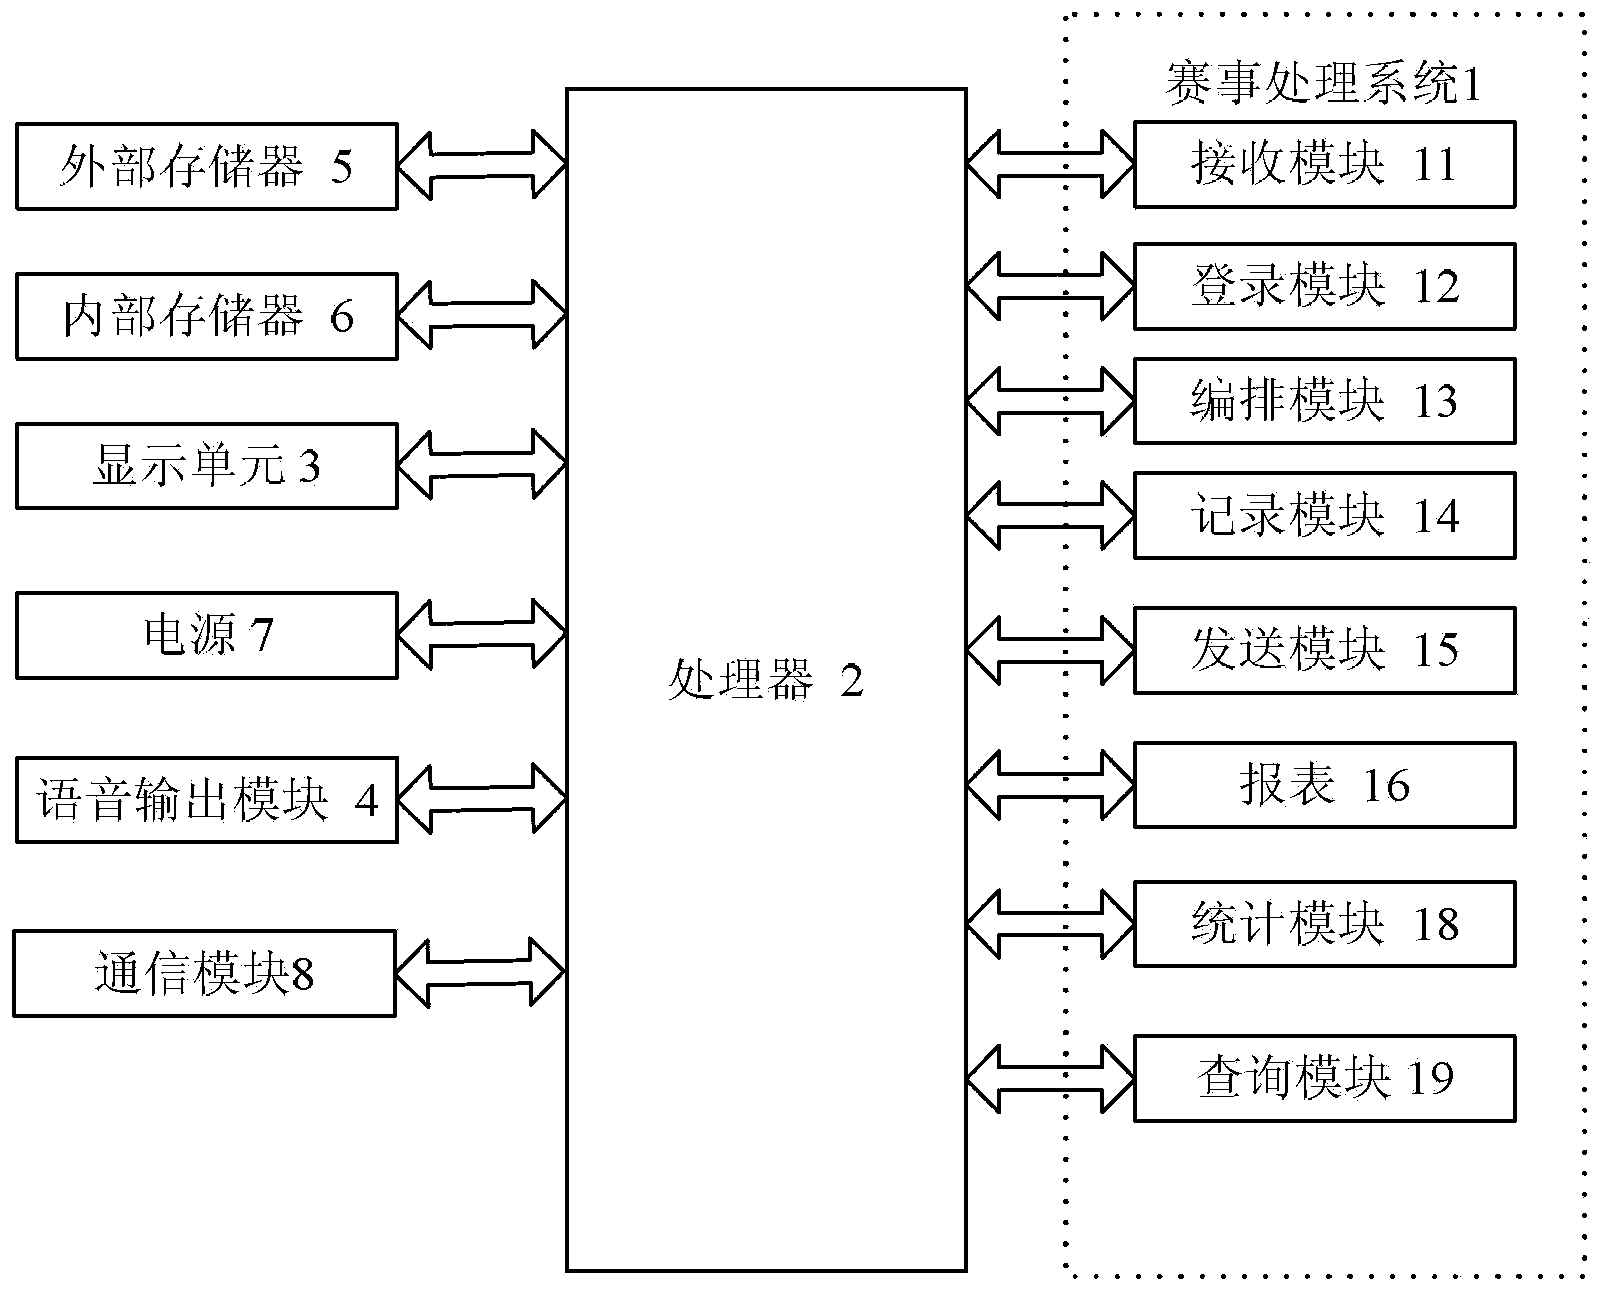 Mobile electronic device with scoring function